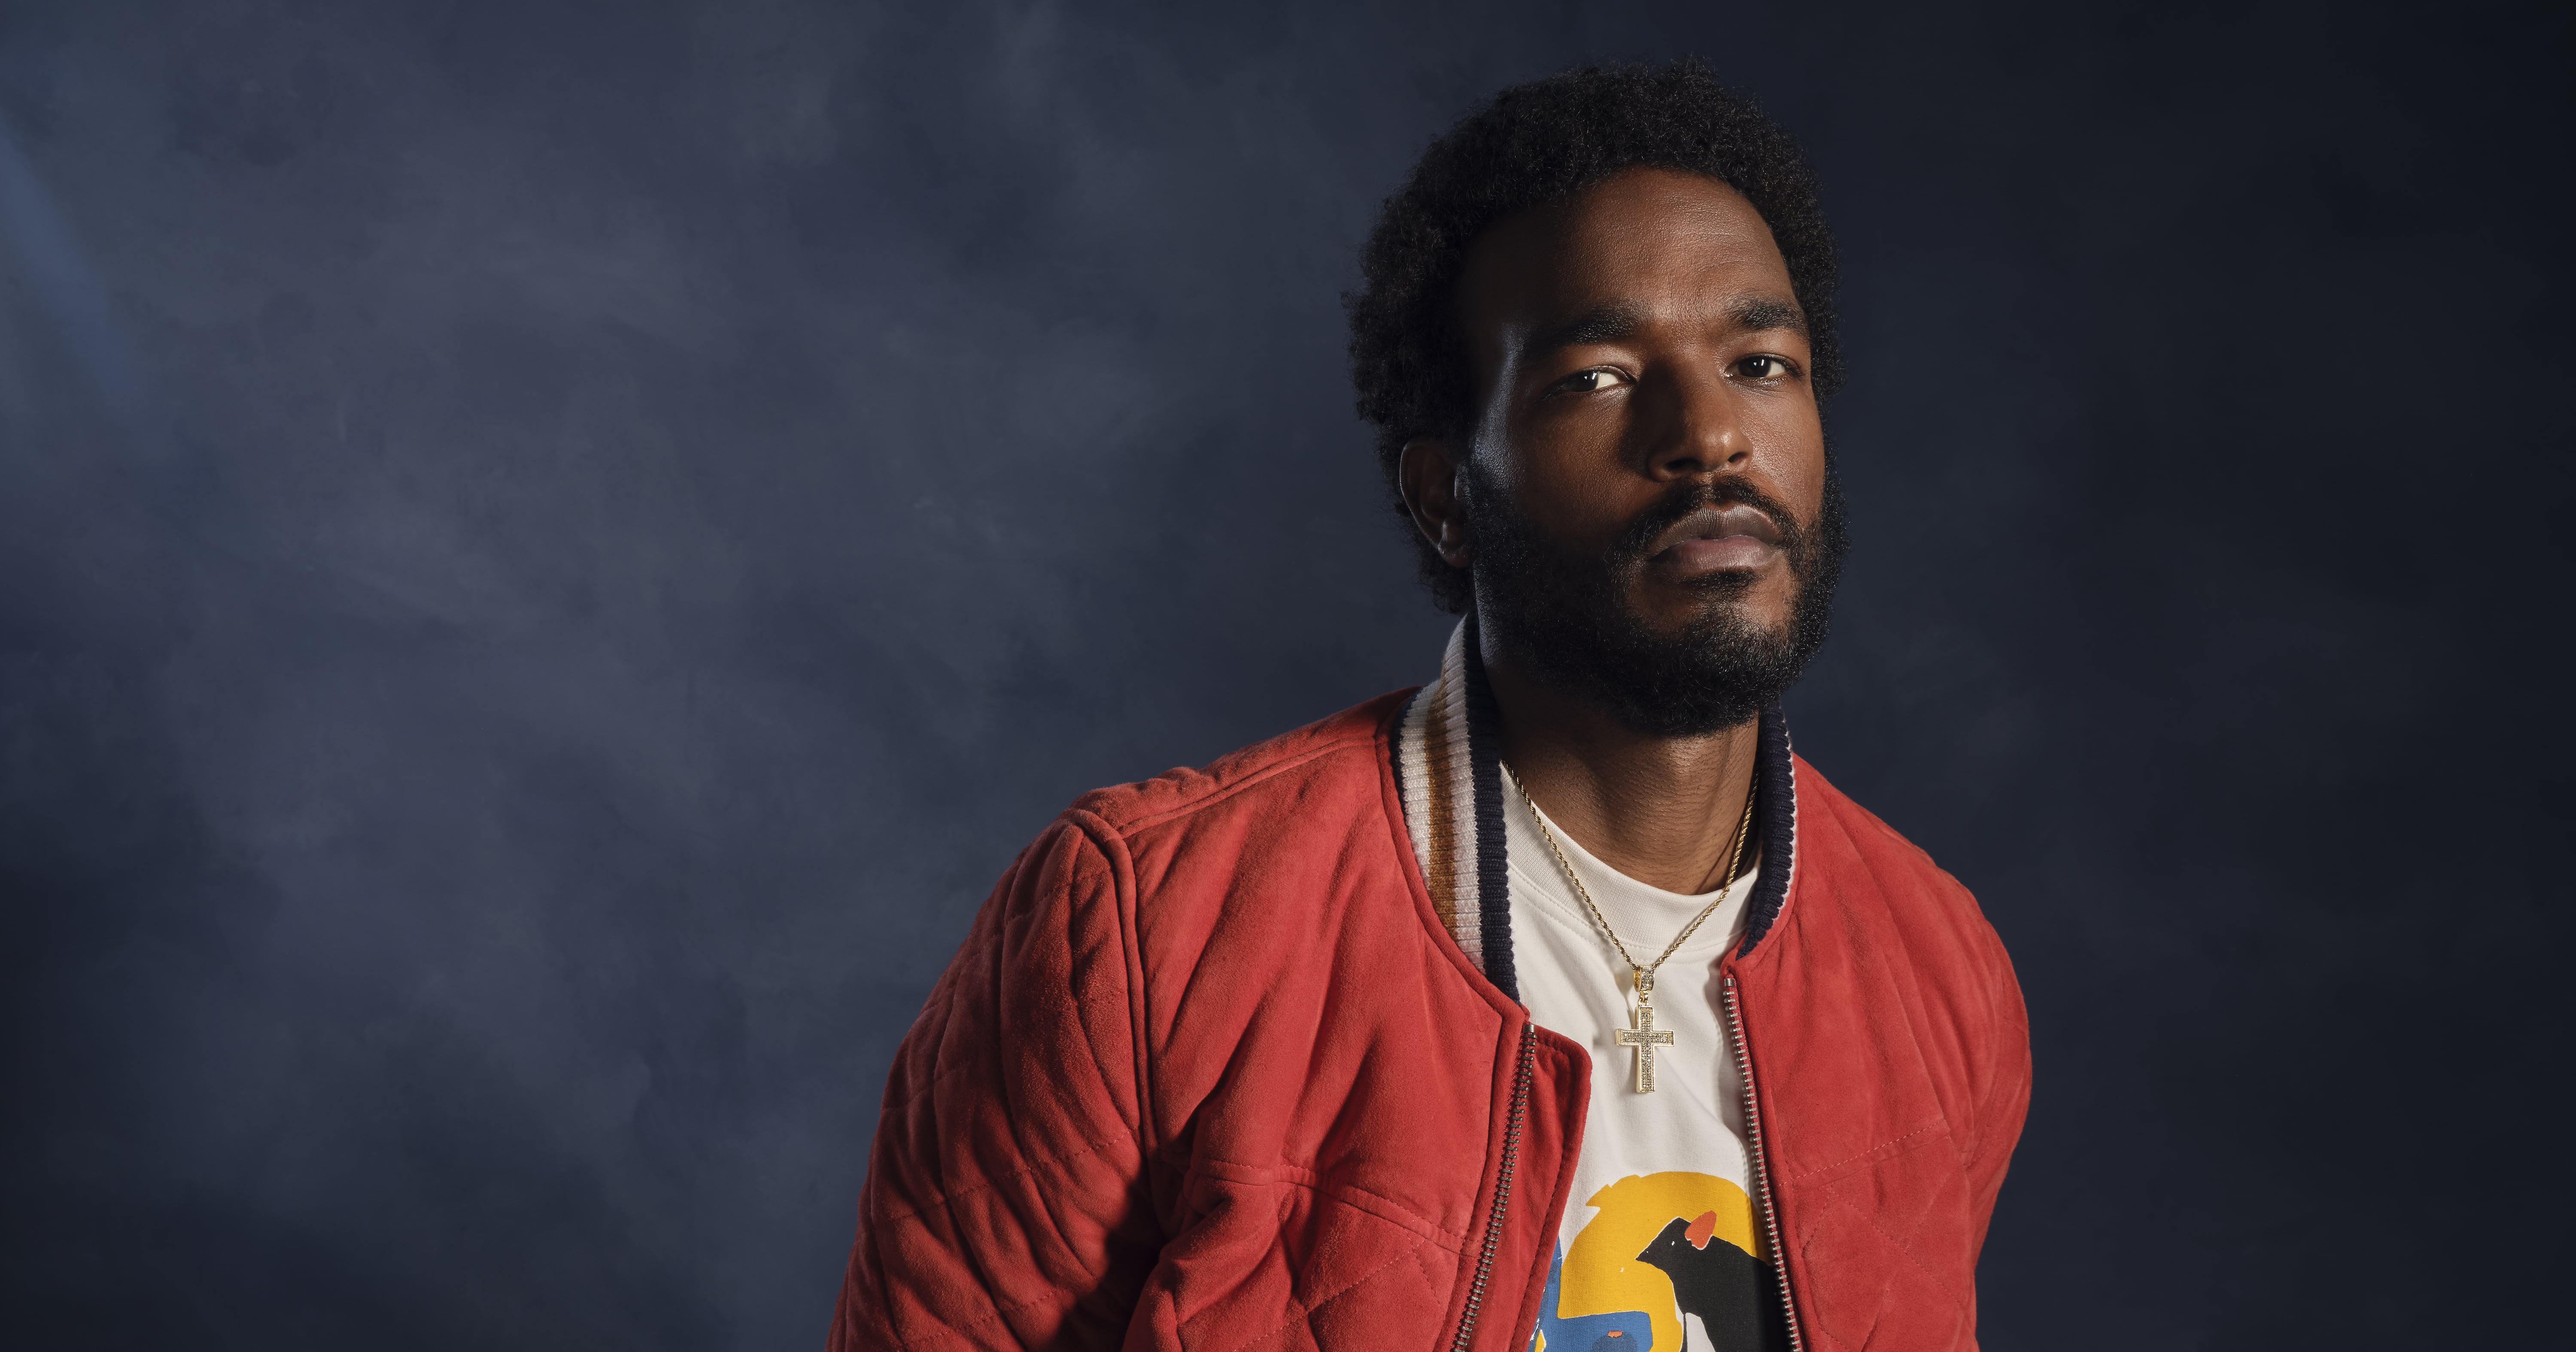 “The Chi”‘s Luke James Says Broadway Was “Profoundly the Hardest Thing” He’s Ever Done